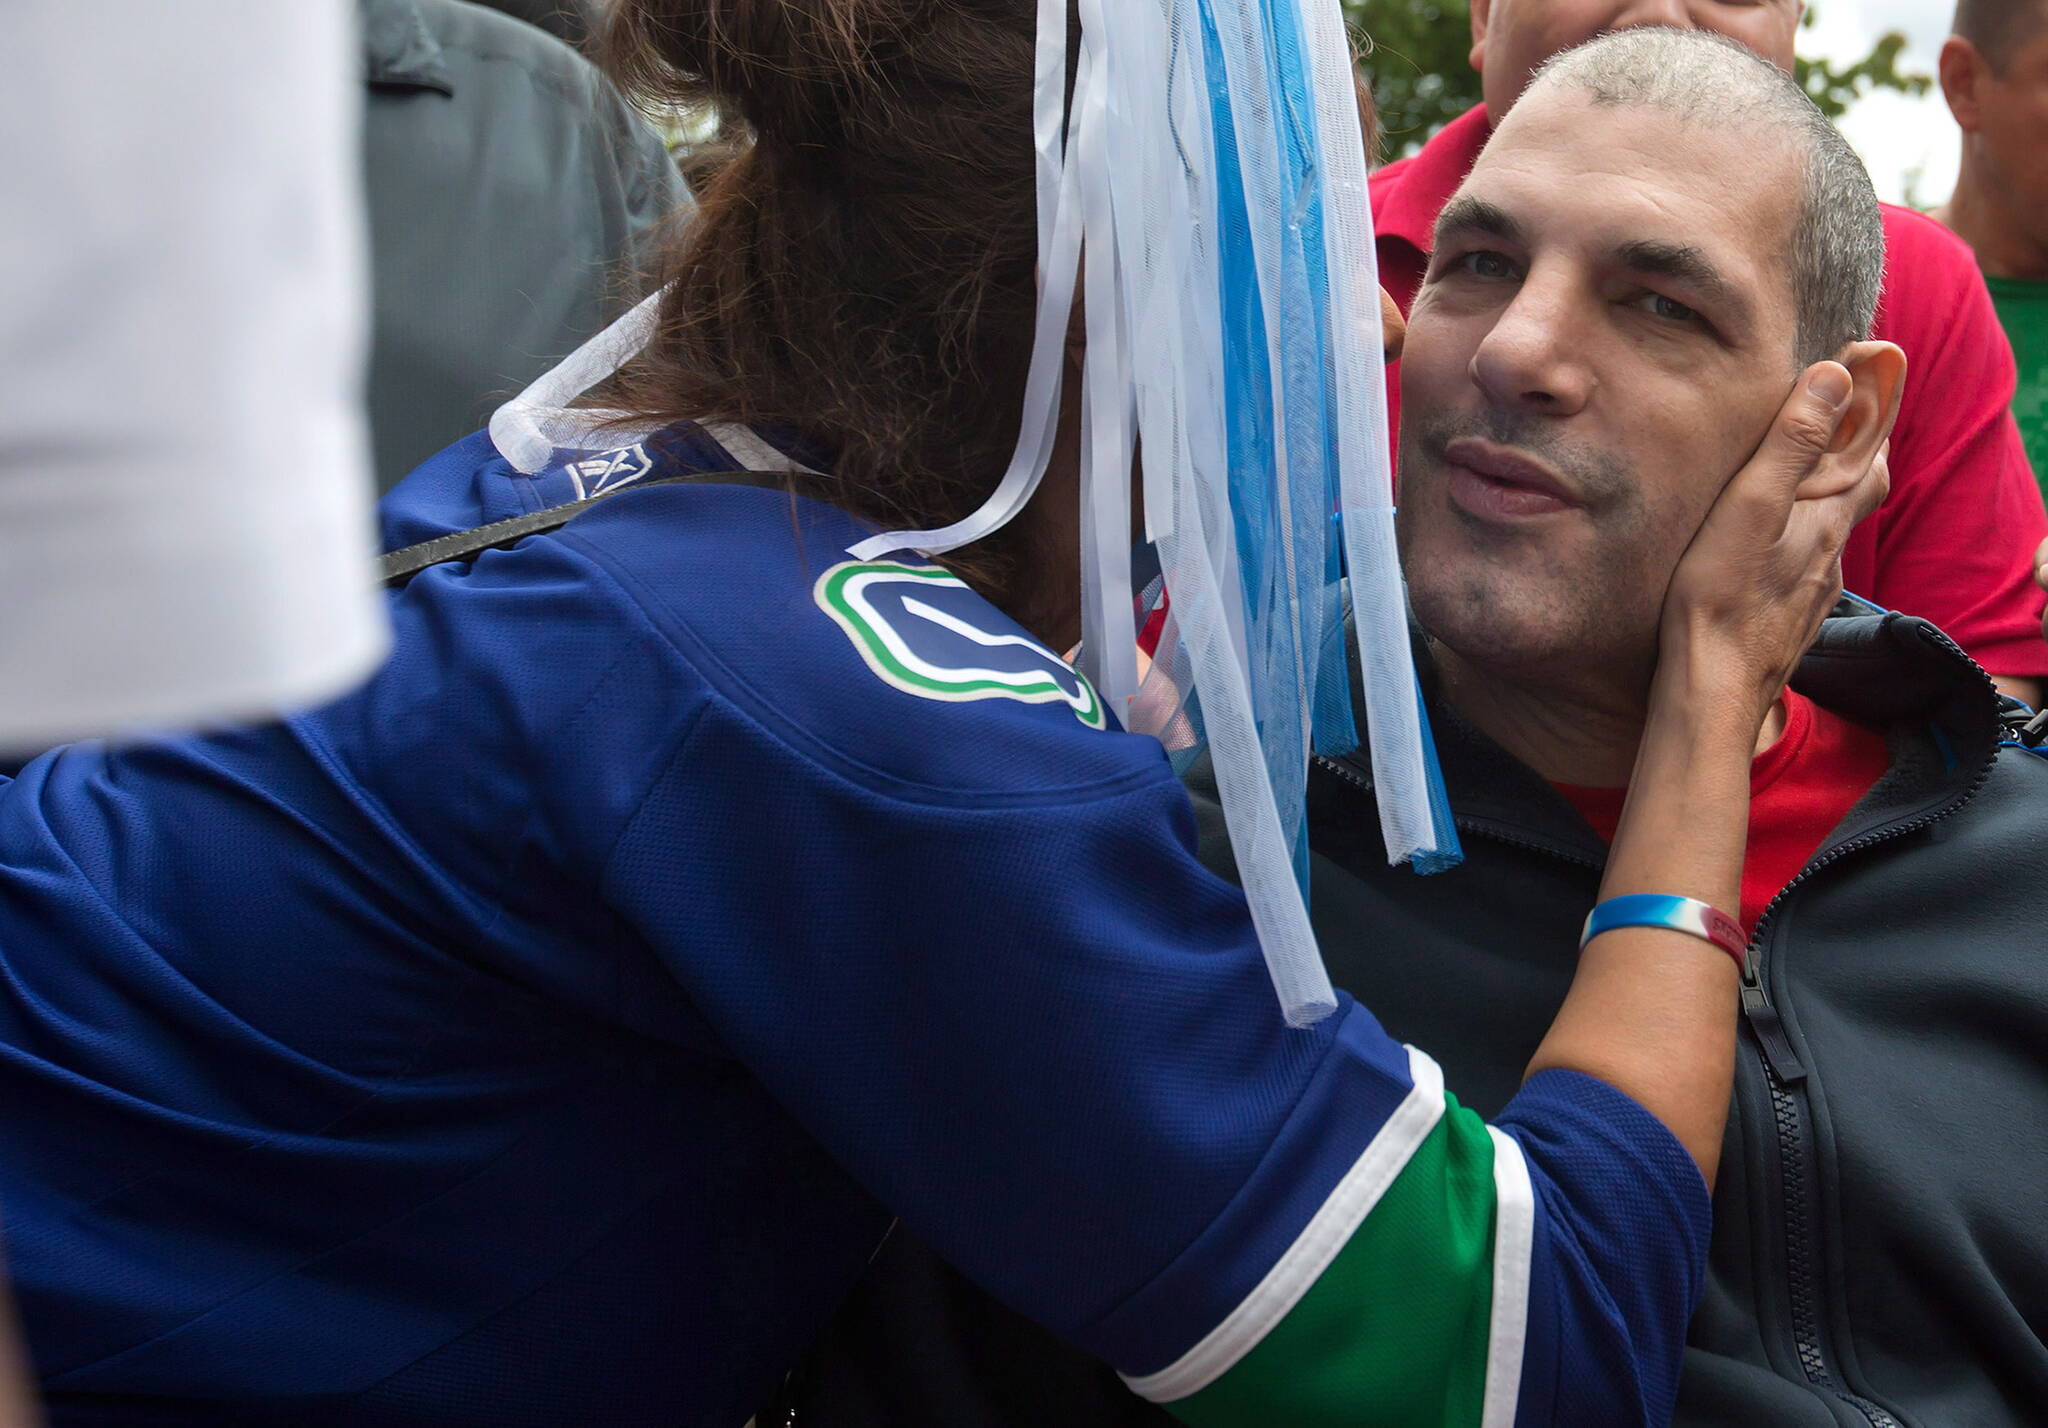 PODCAST: Gino Odjick, one of the most popular Canucks of all time